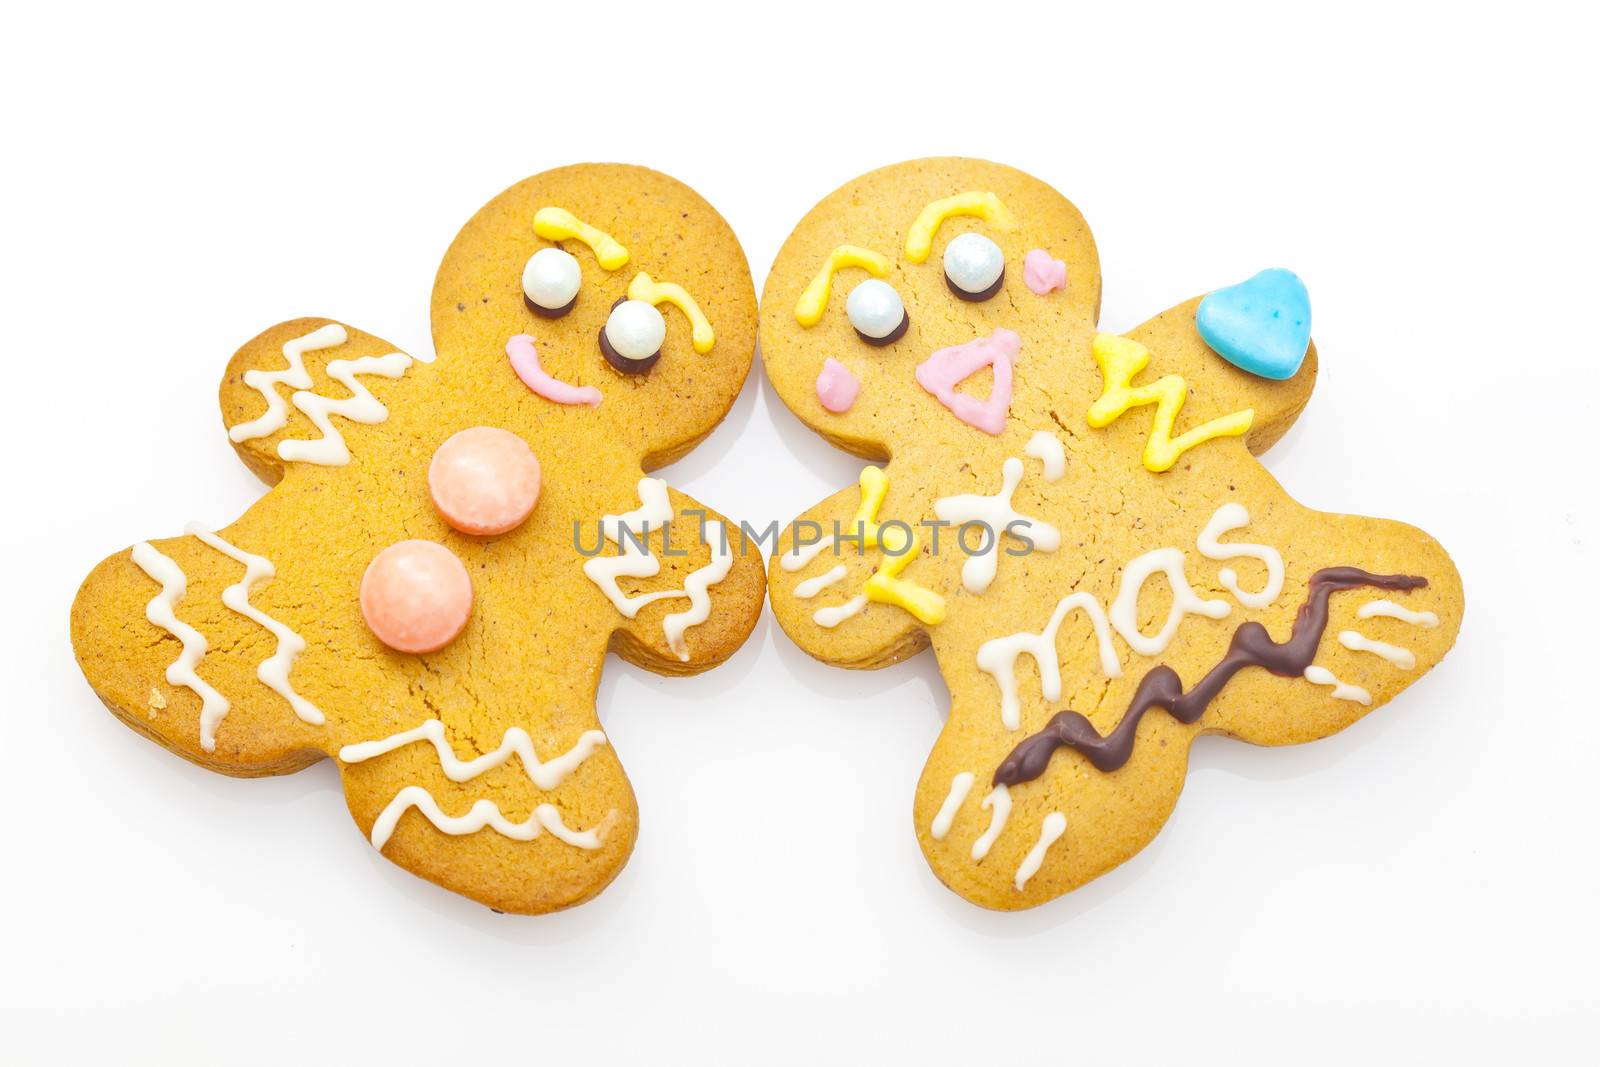 Ginger bread man cookies isolated on white background